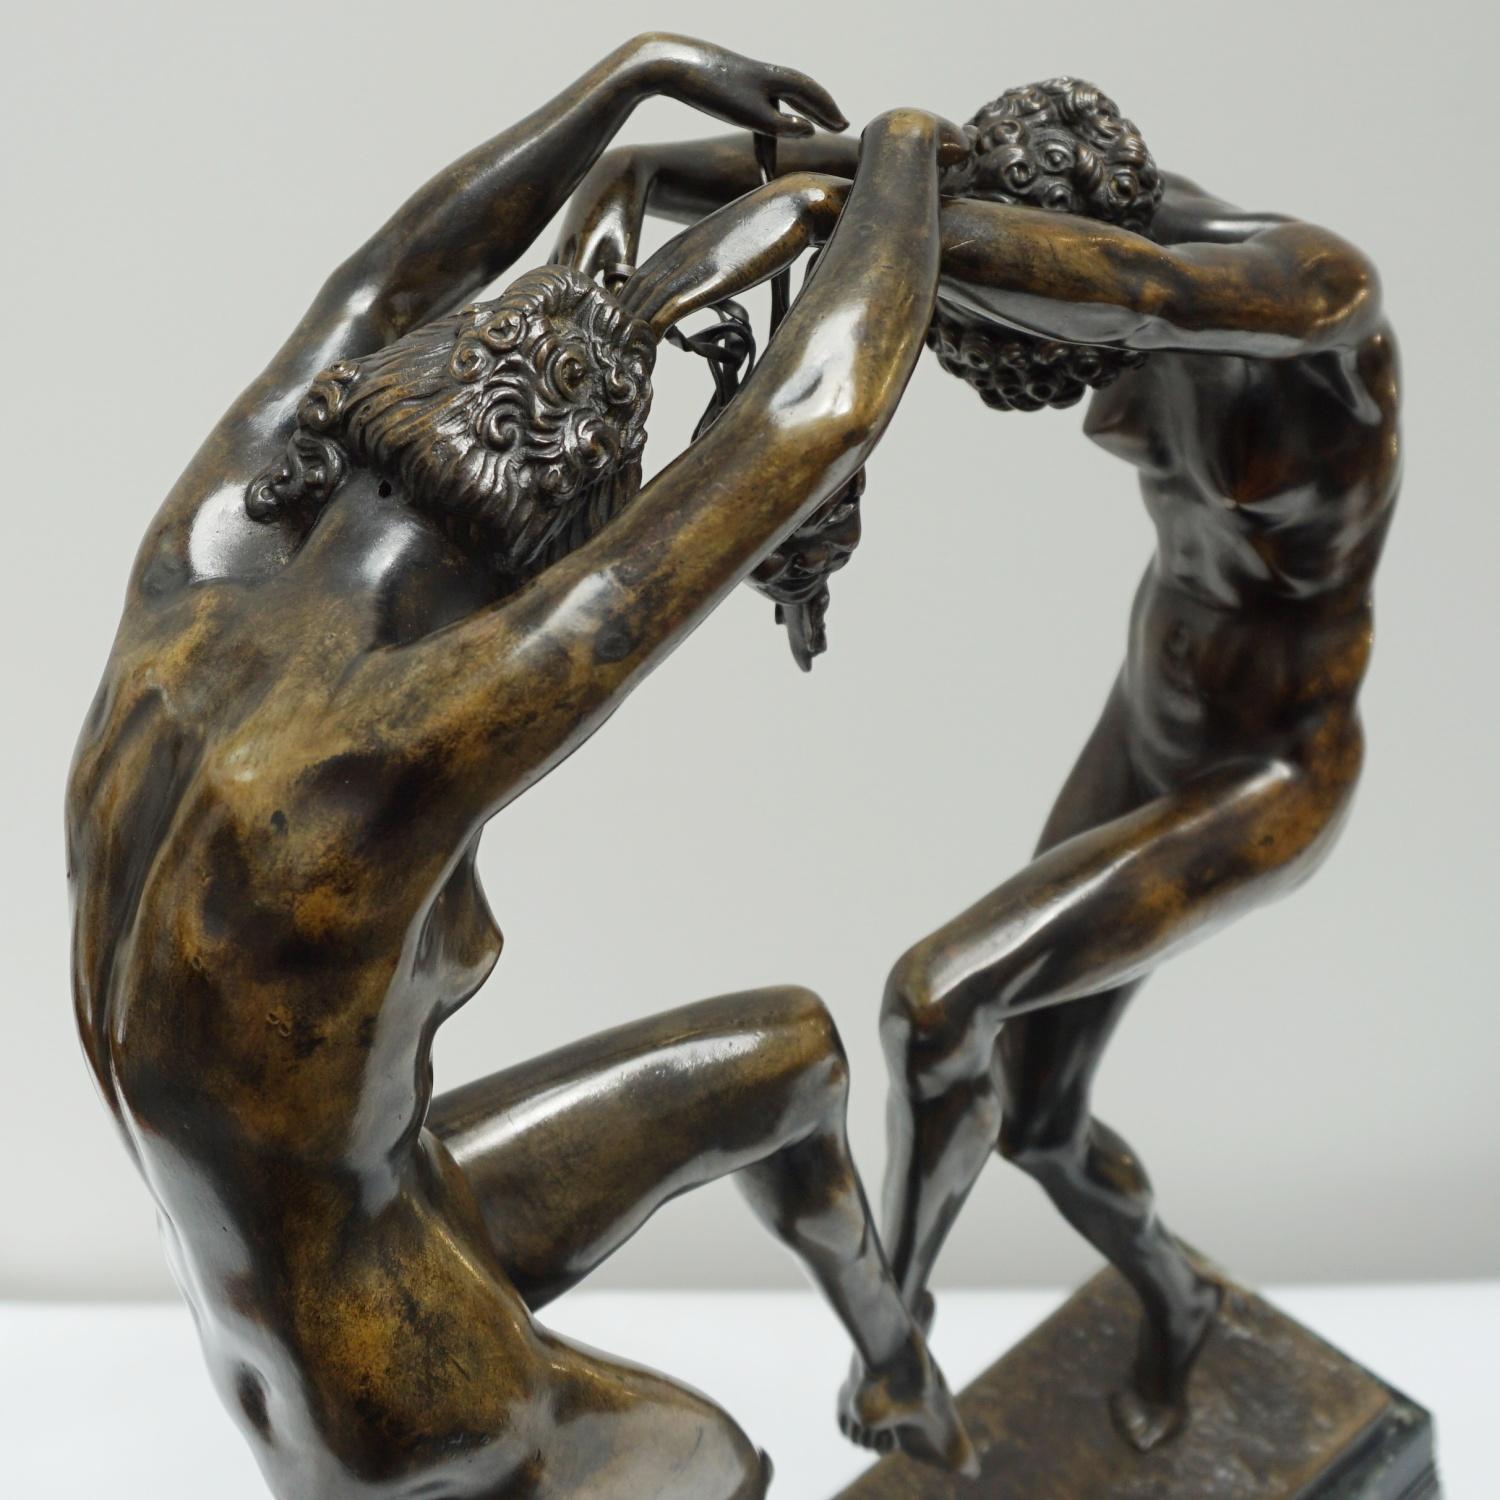 Original Art Deco Bronze and Marble Sculpture, French, C1920 For Sale 10